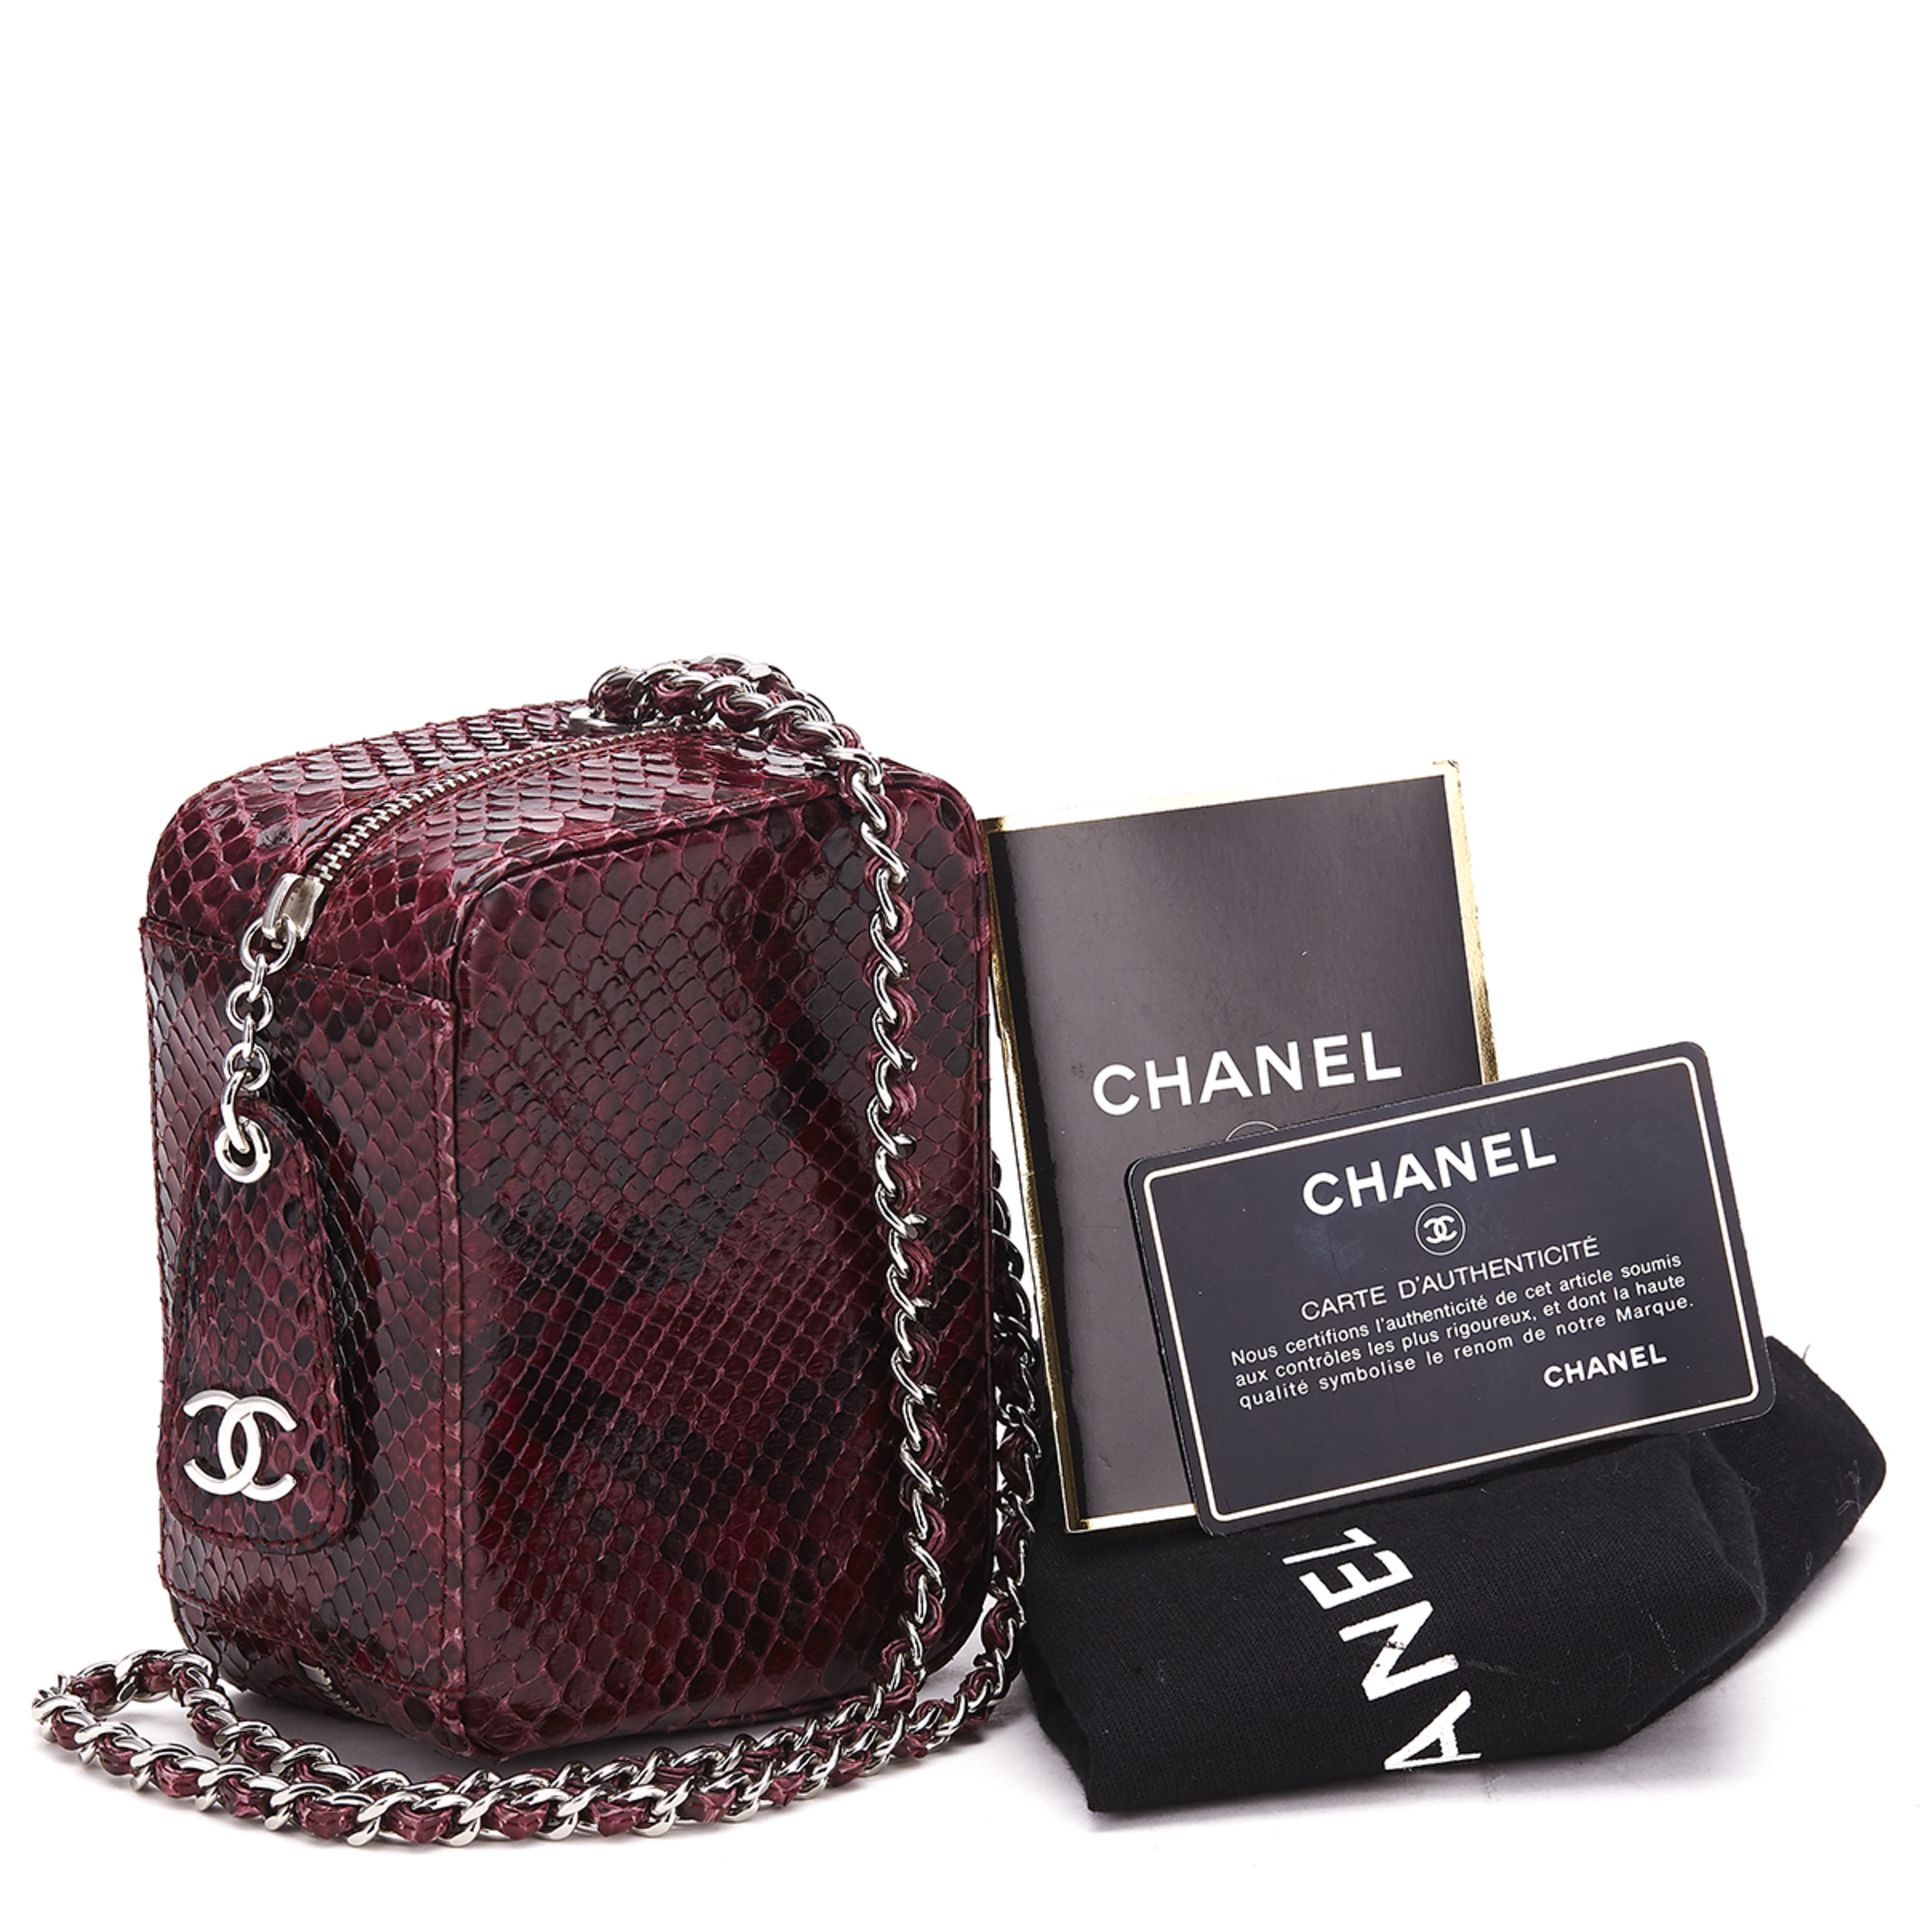 CHANEL Mini Timeless Bag , - Raspberry Python Leather Mini TYPE Clutch   SERIAL NUMBER 6258730 - Image 9 of 9